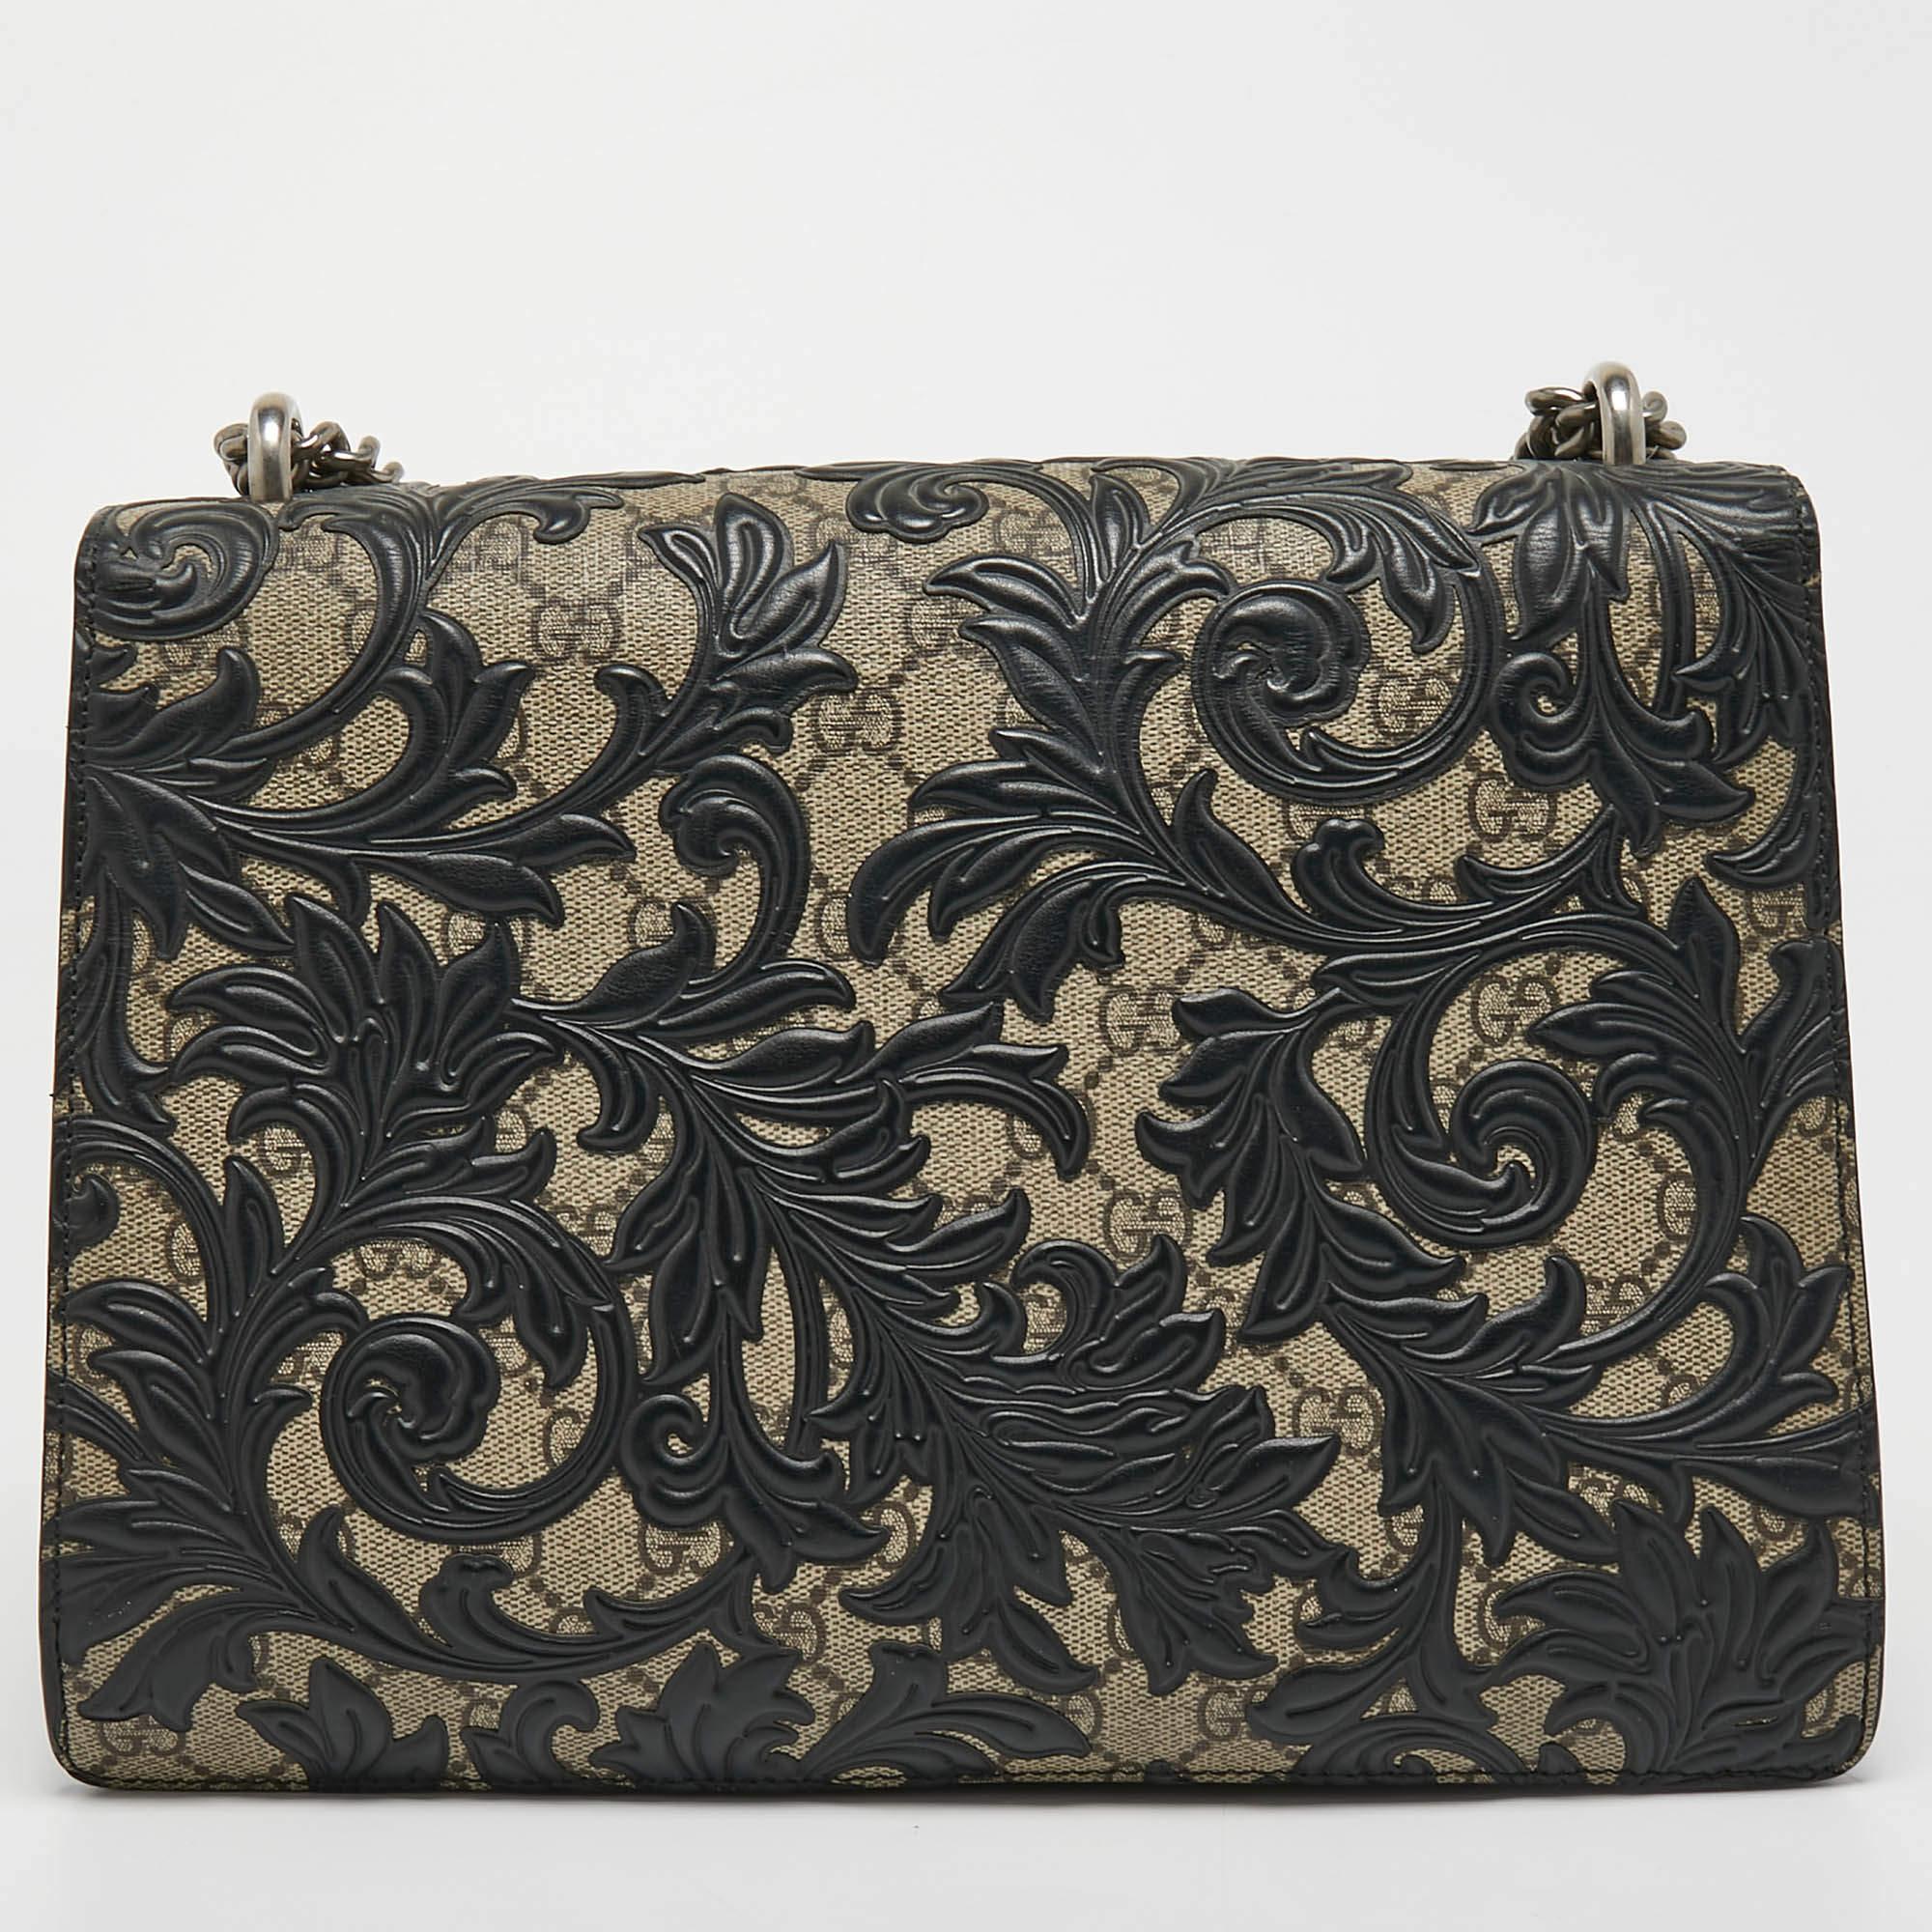 Gucci's Dionysus collection is inspired by the Greek God Dionysus, who is believed to have crossed the Tigris river on a tiger sent to him by Zeus. This creation has been made from GG Supreme canvas along leather with striking Arabesque detailing